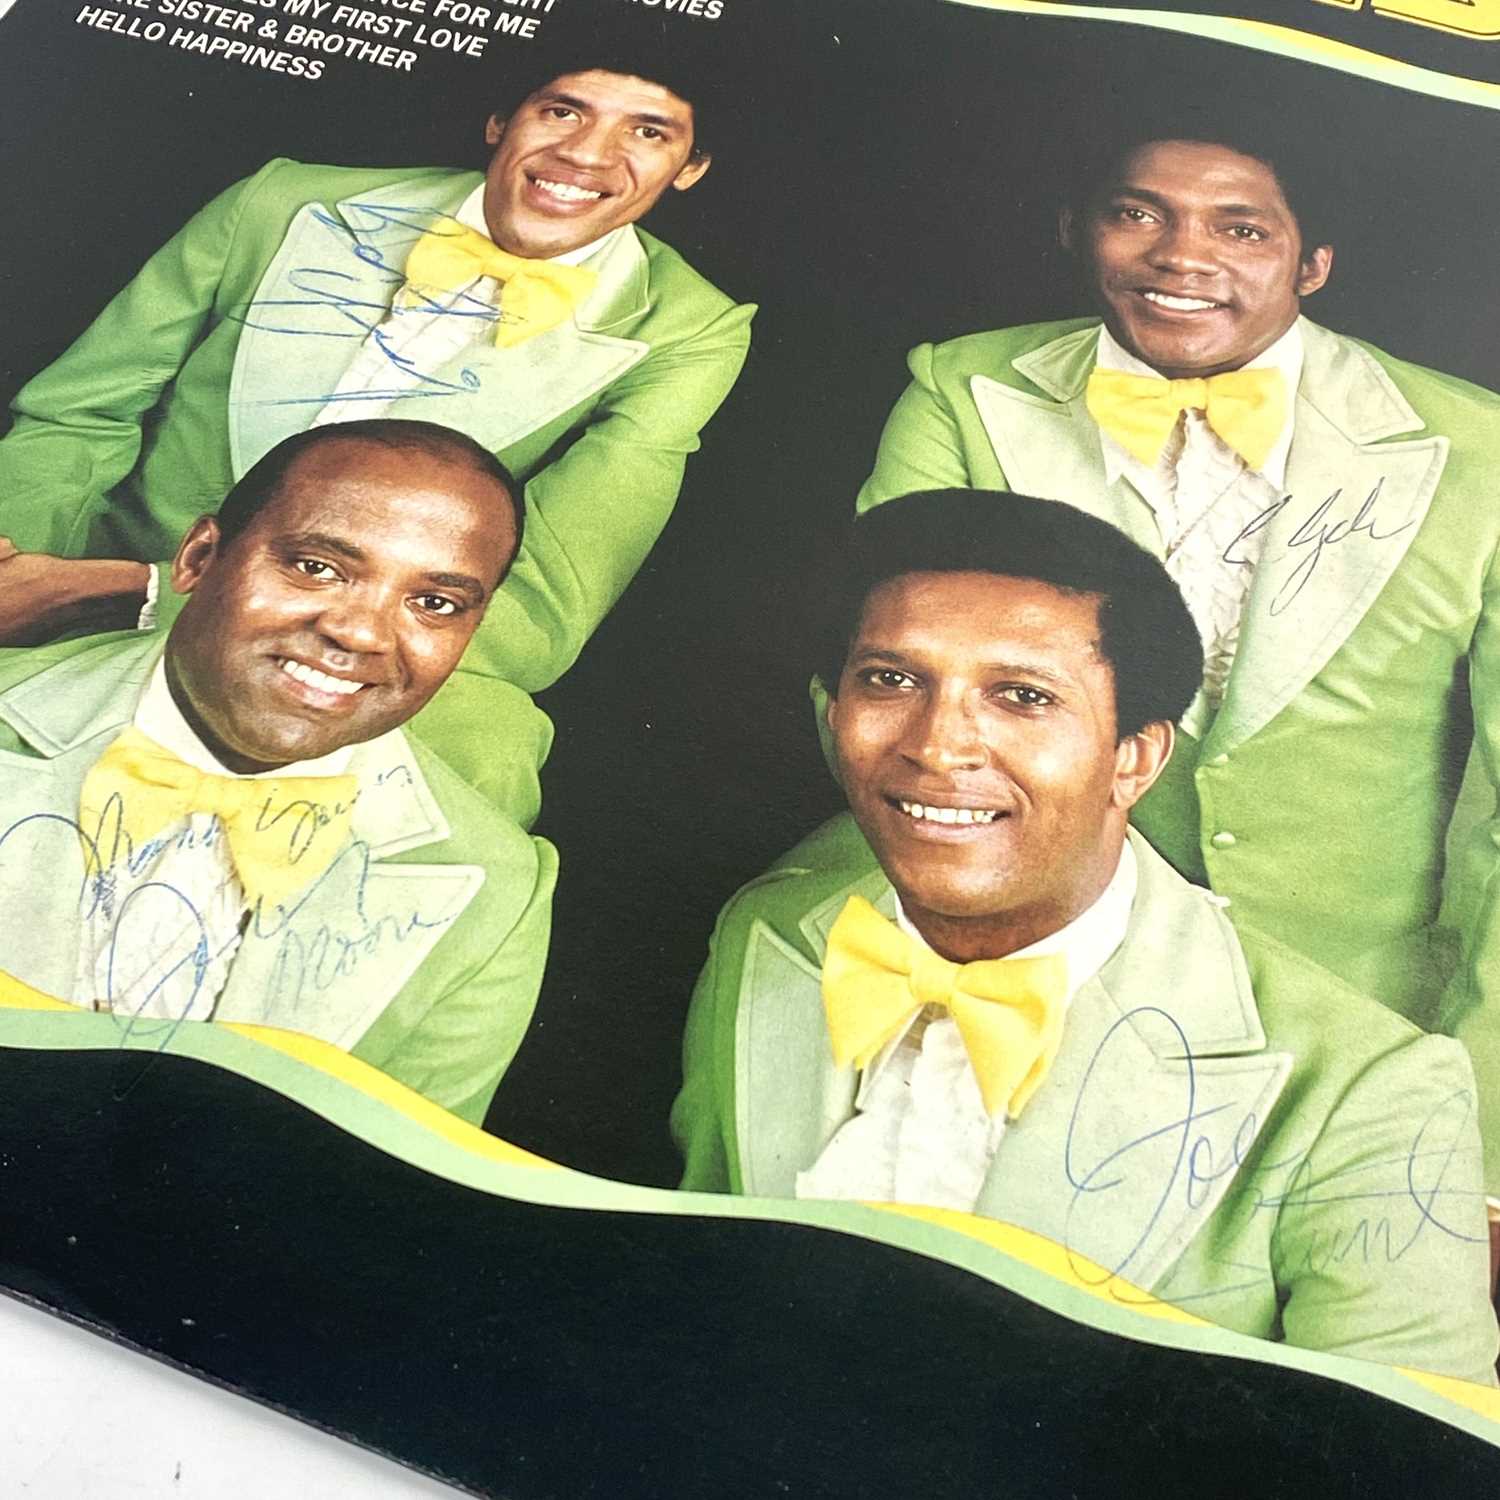 Signed; The Drifters - Image 11 of 11